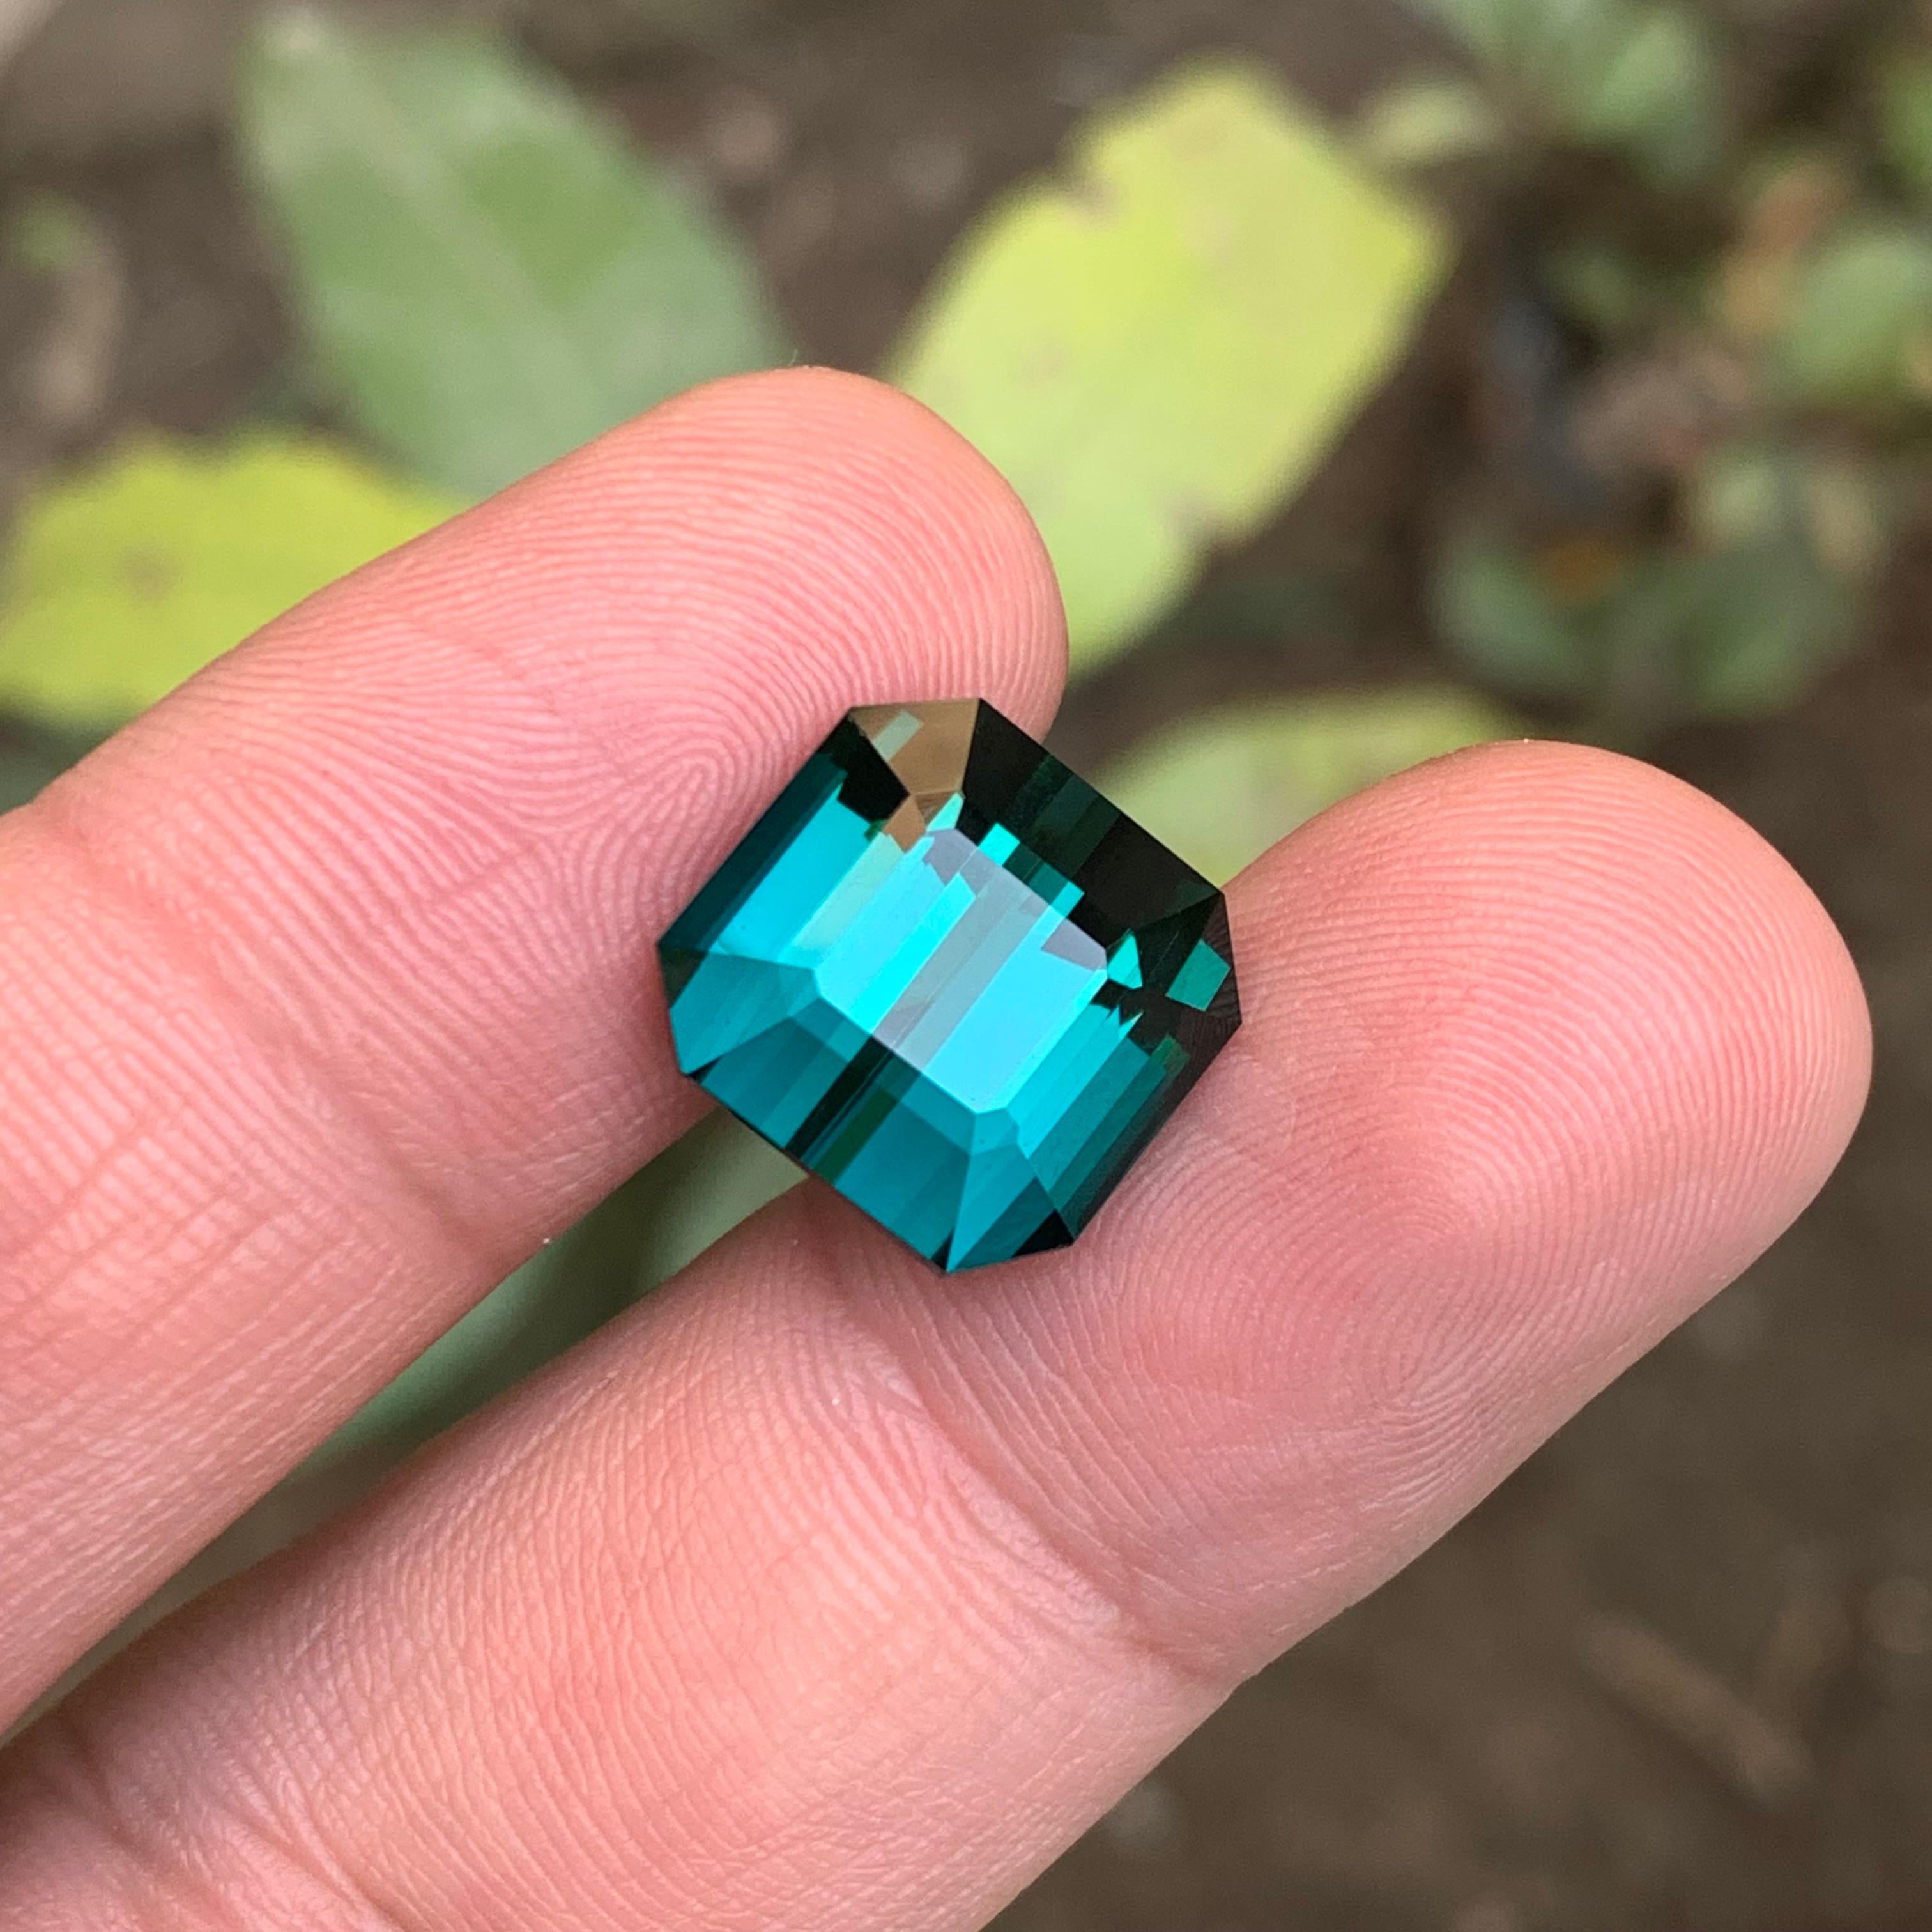 Rare Teal Blue Flawless Tourmaline Gemstone, 15.30 Ct Emerald Cut-Ring/Pendant For Sale 12